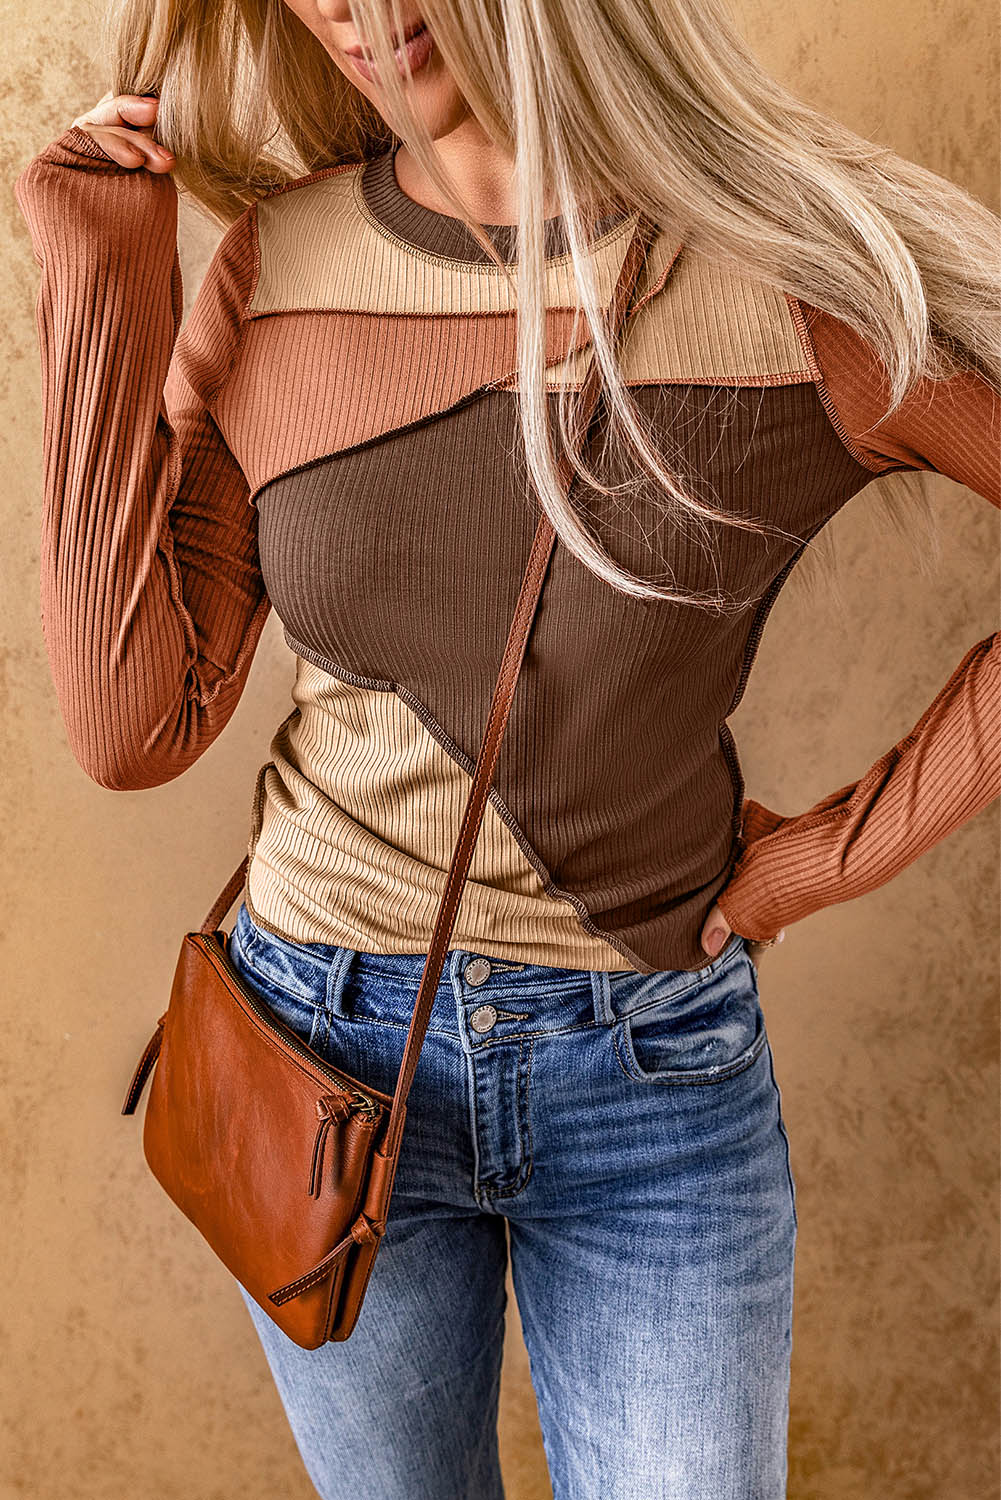 Cali Chic Brown Expose Seam Color Block Ribbed Knit Top